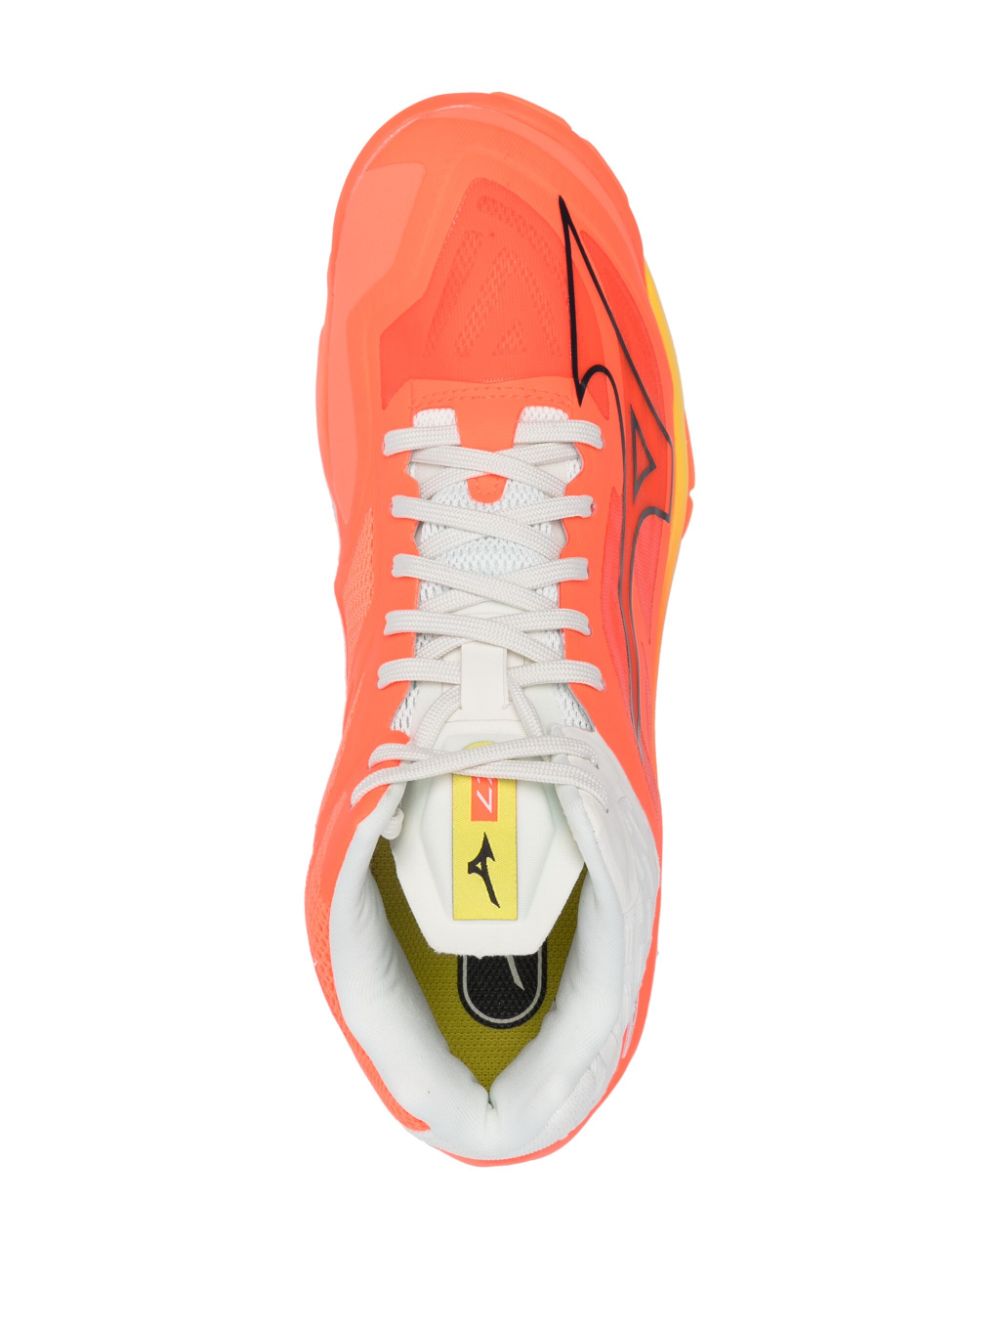 Wave Lightning Z7 lace-up sneakers